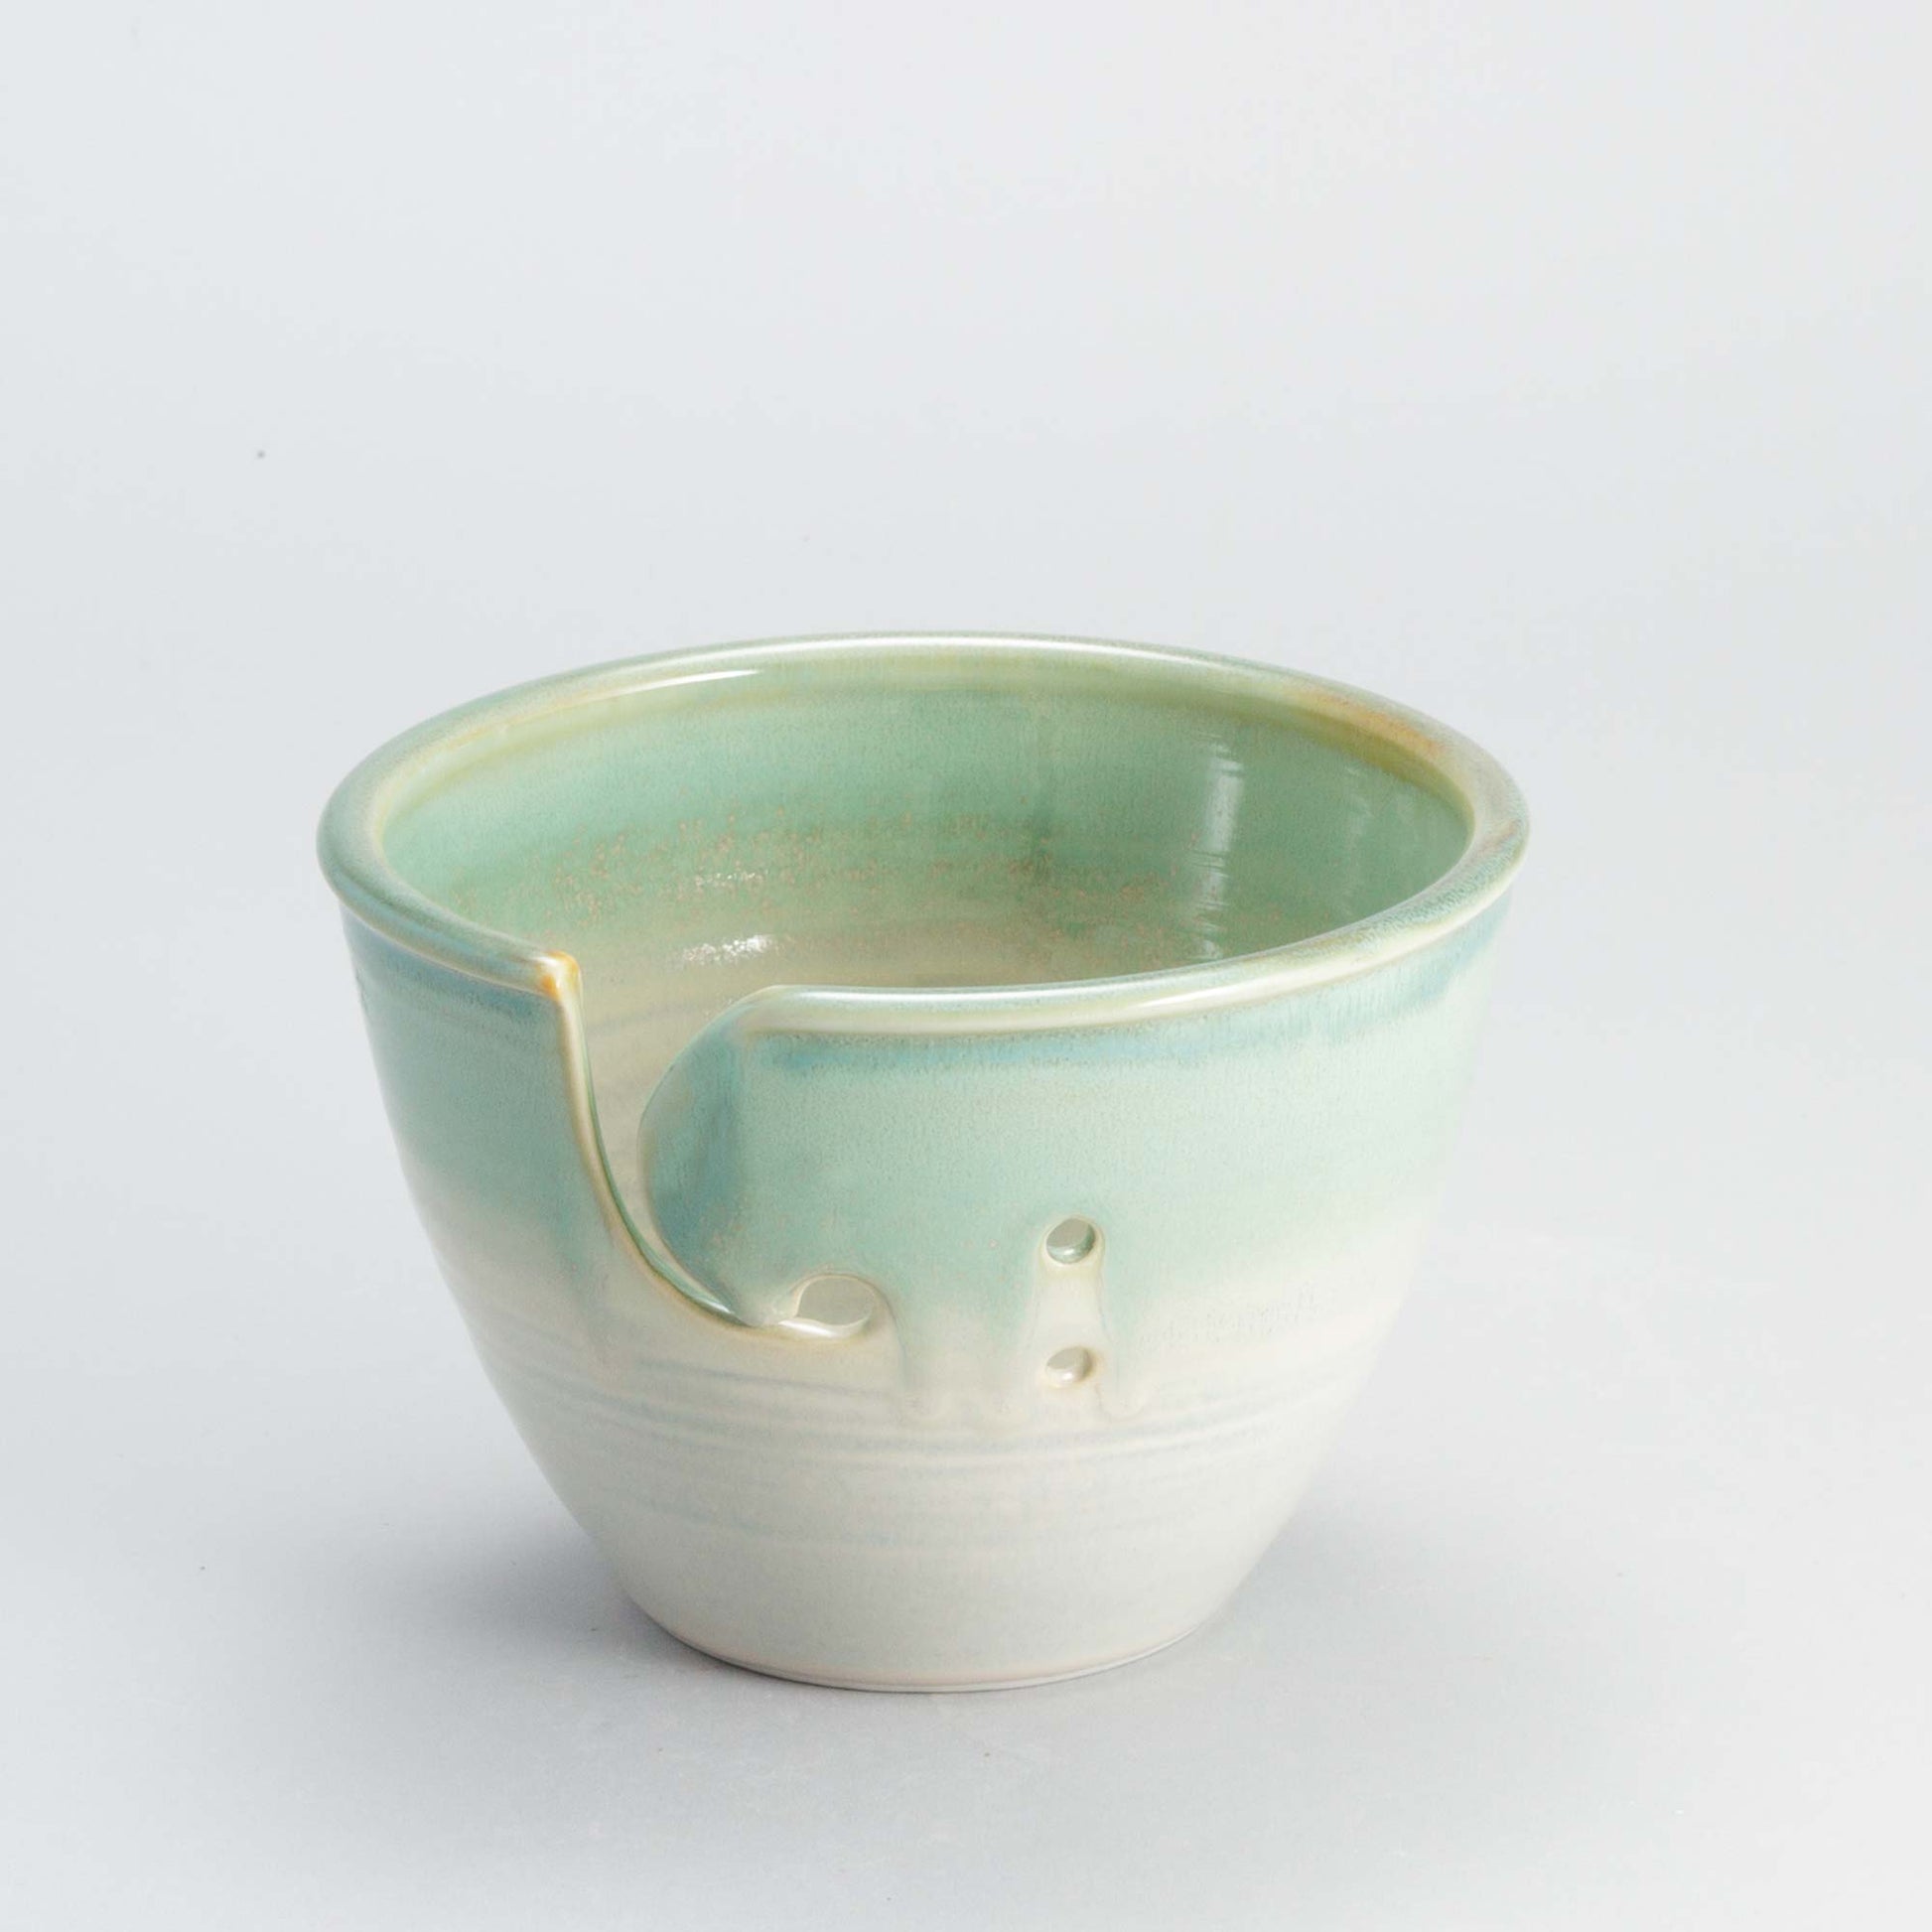 Handmade Pottery Knitting Bowl in Ivory & Green pattern made by Georgetown Pottery in Maine